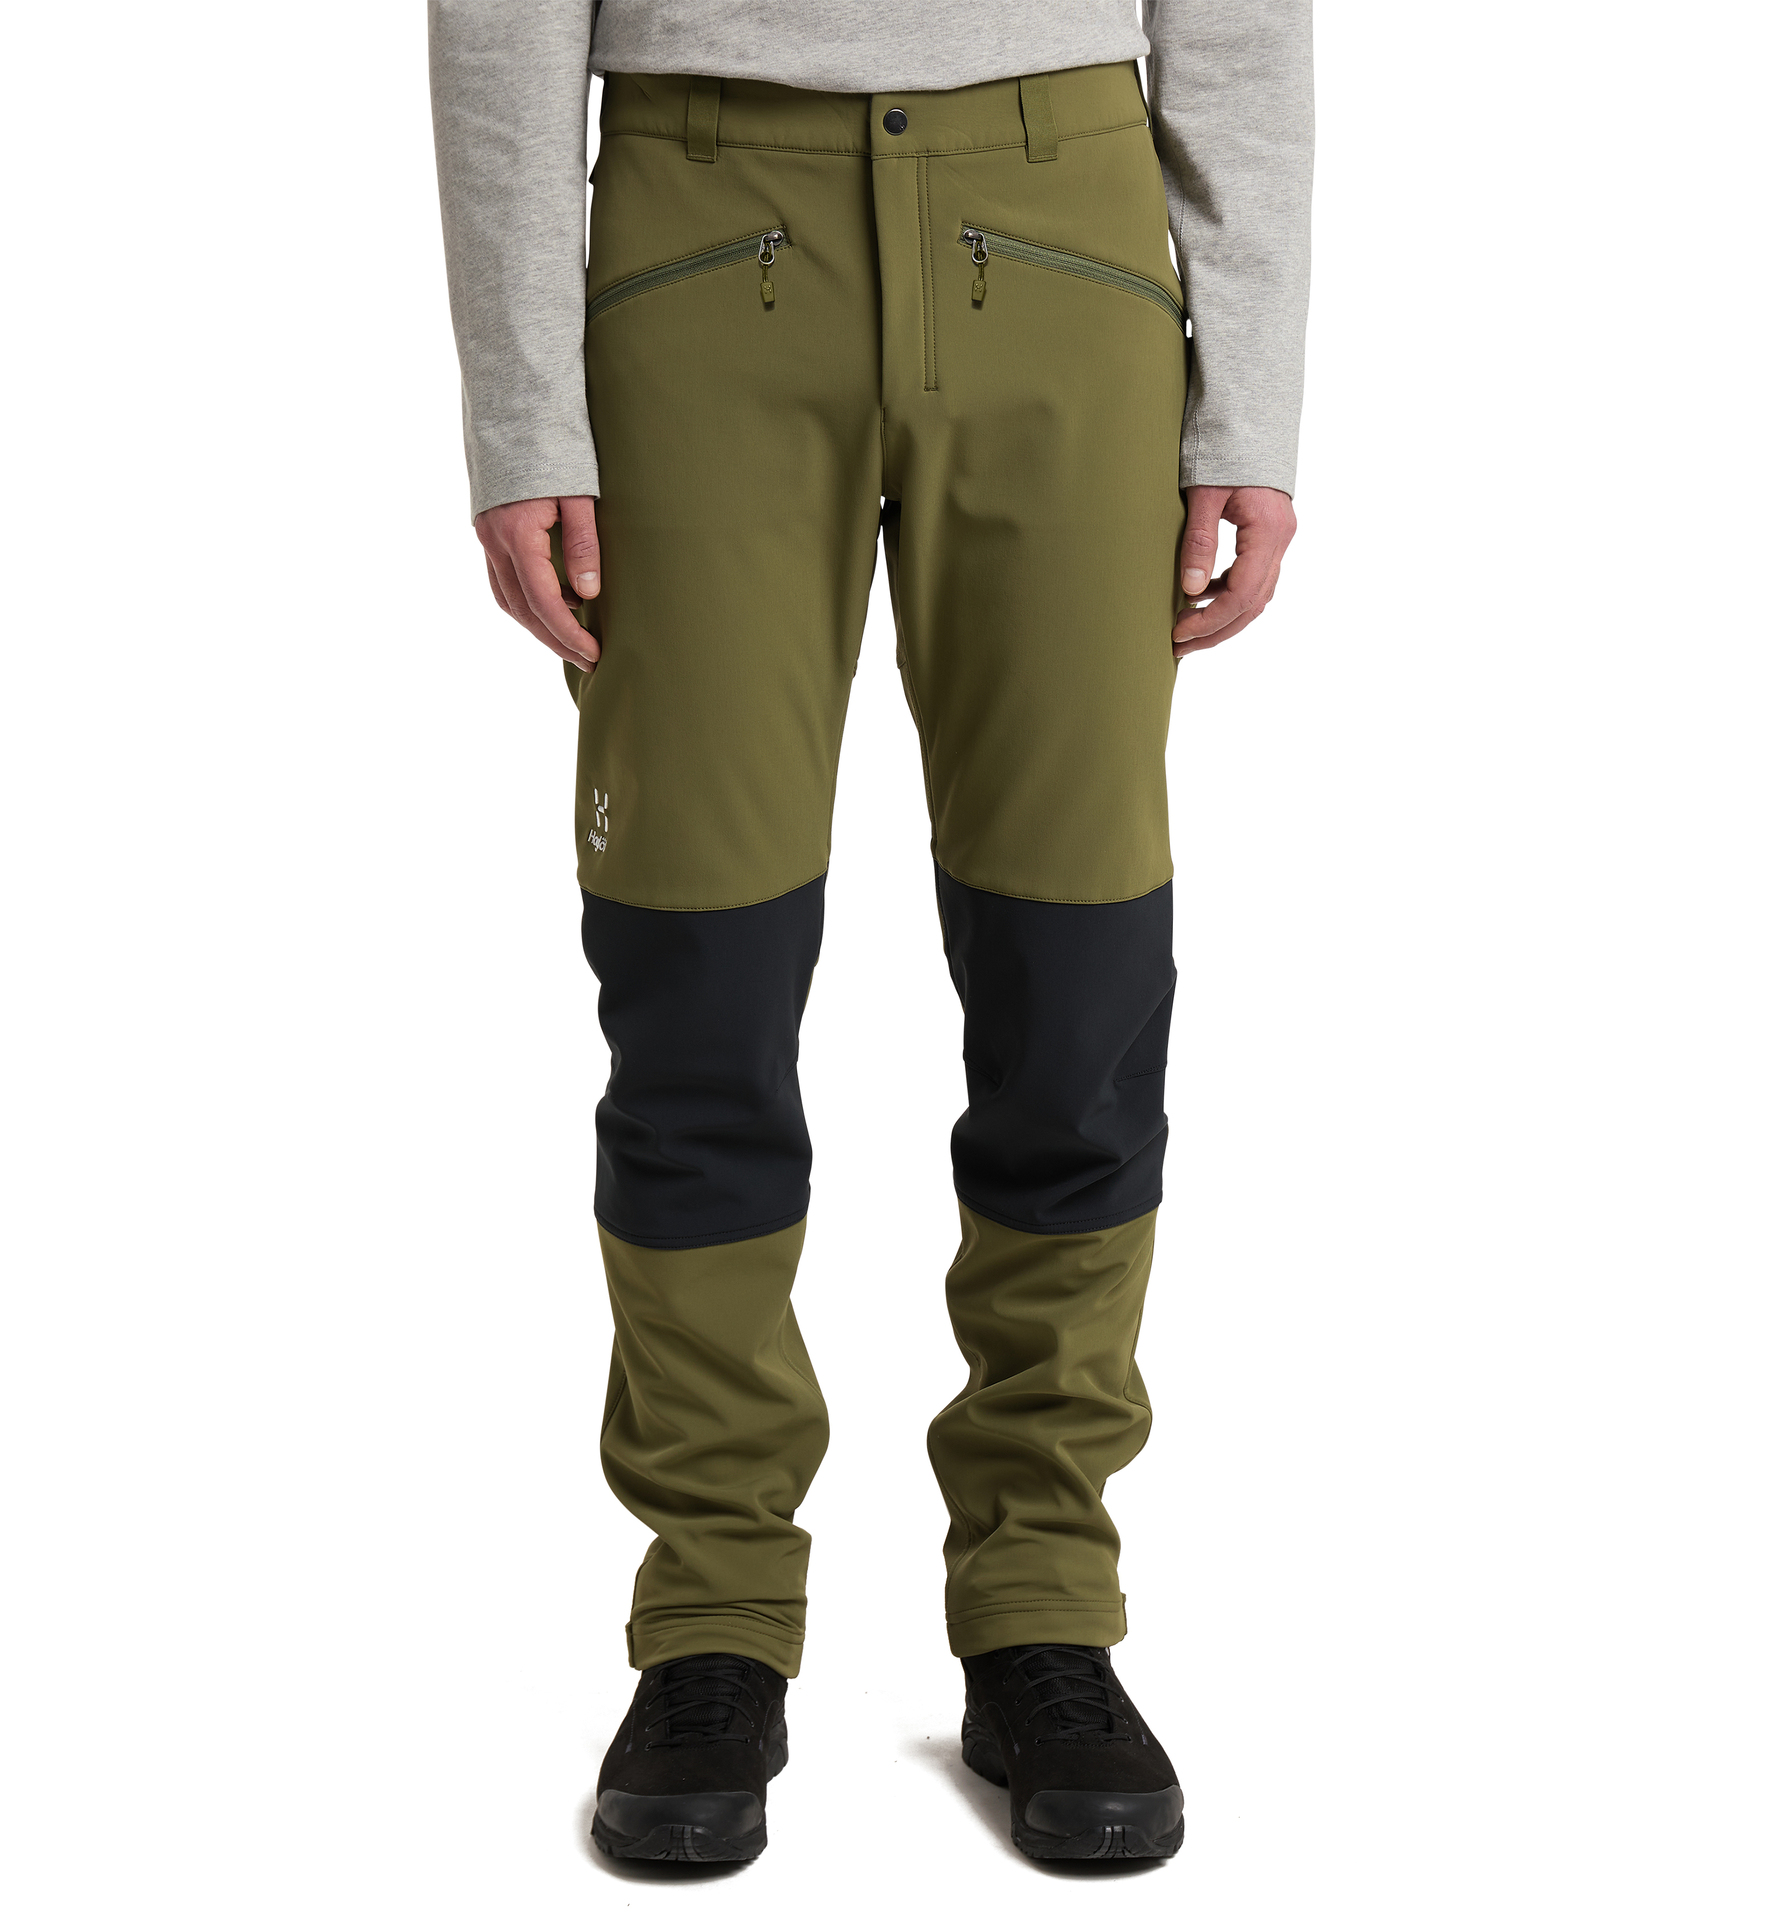 Eco friendly hiking pants for men